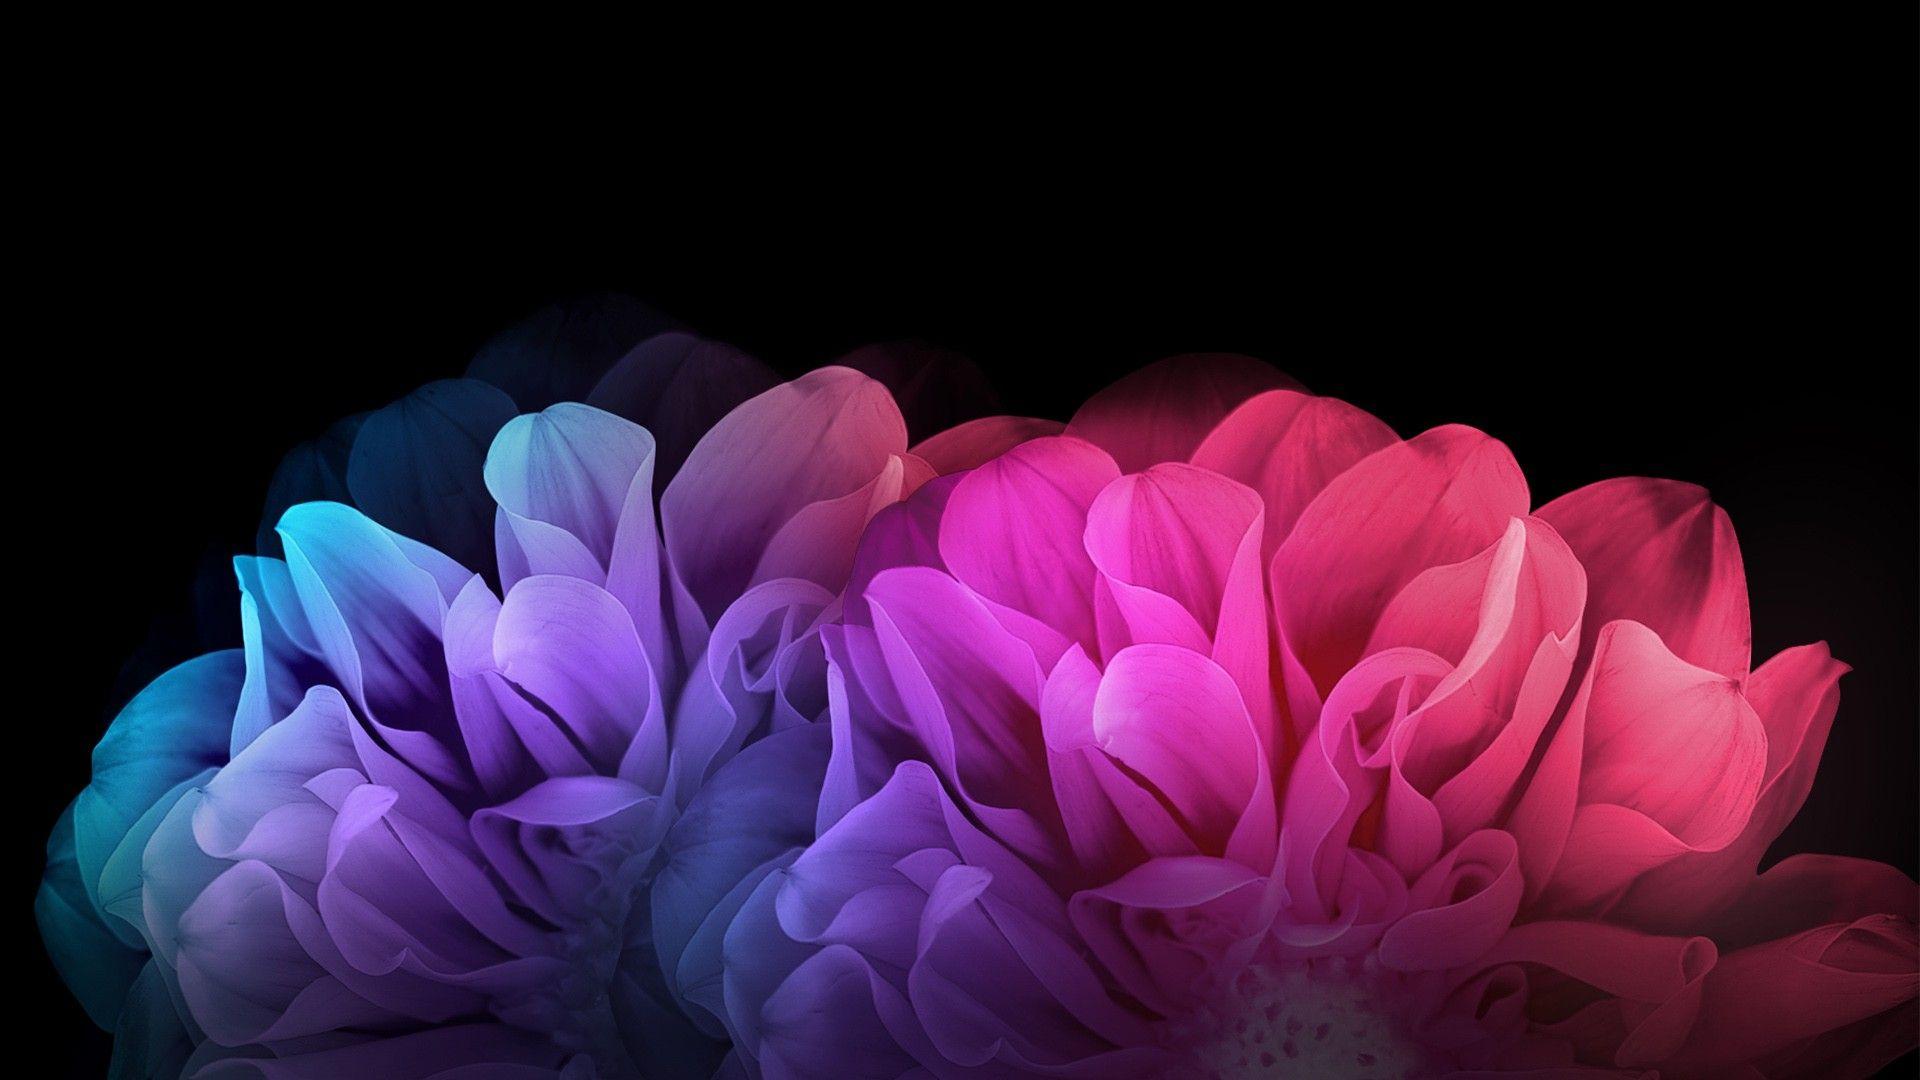 Colorful Flowers Dark Background. HD Wallpaper Download